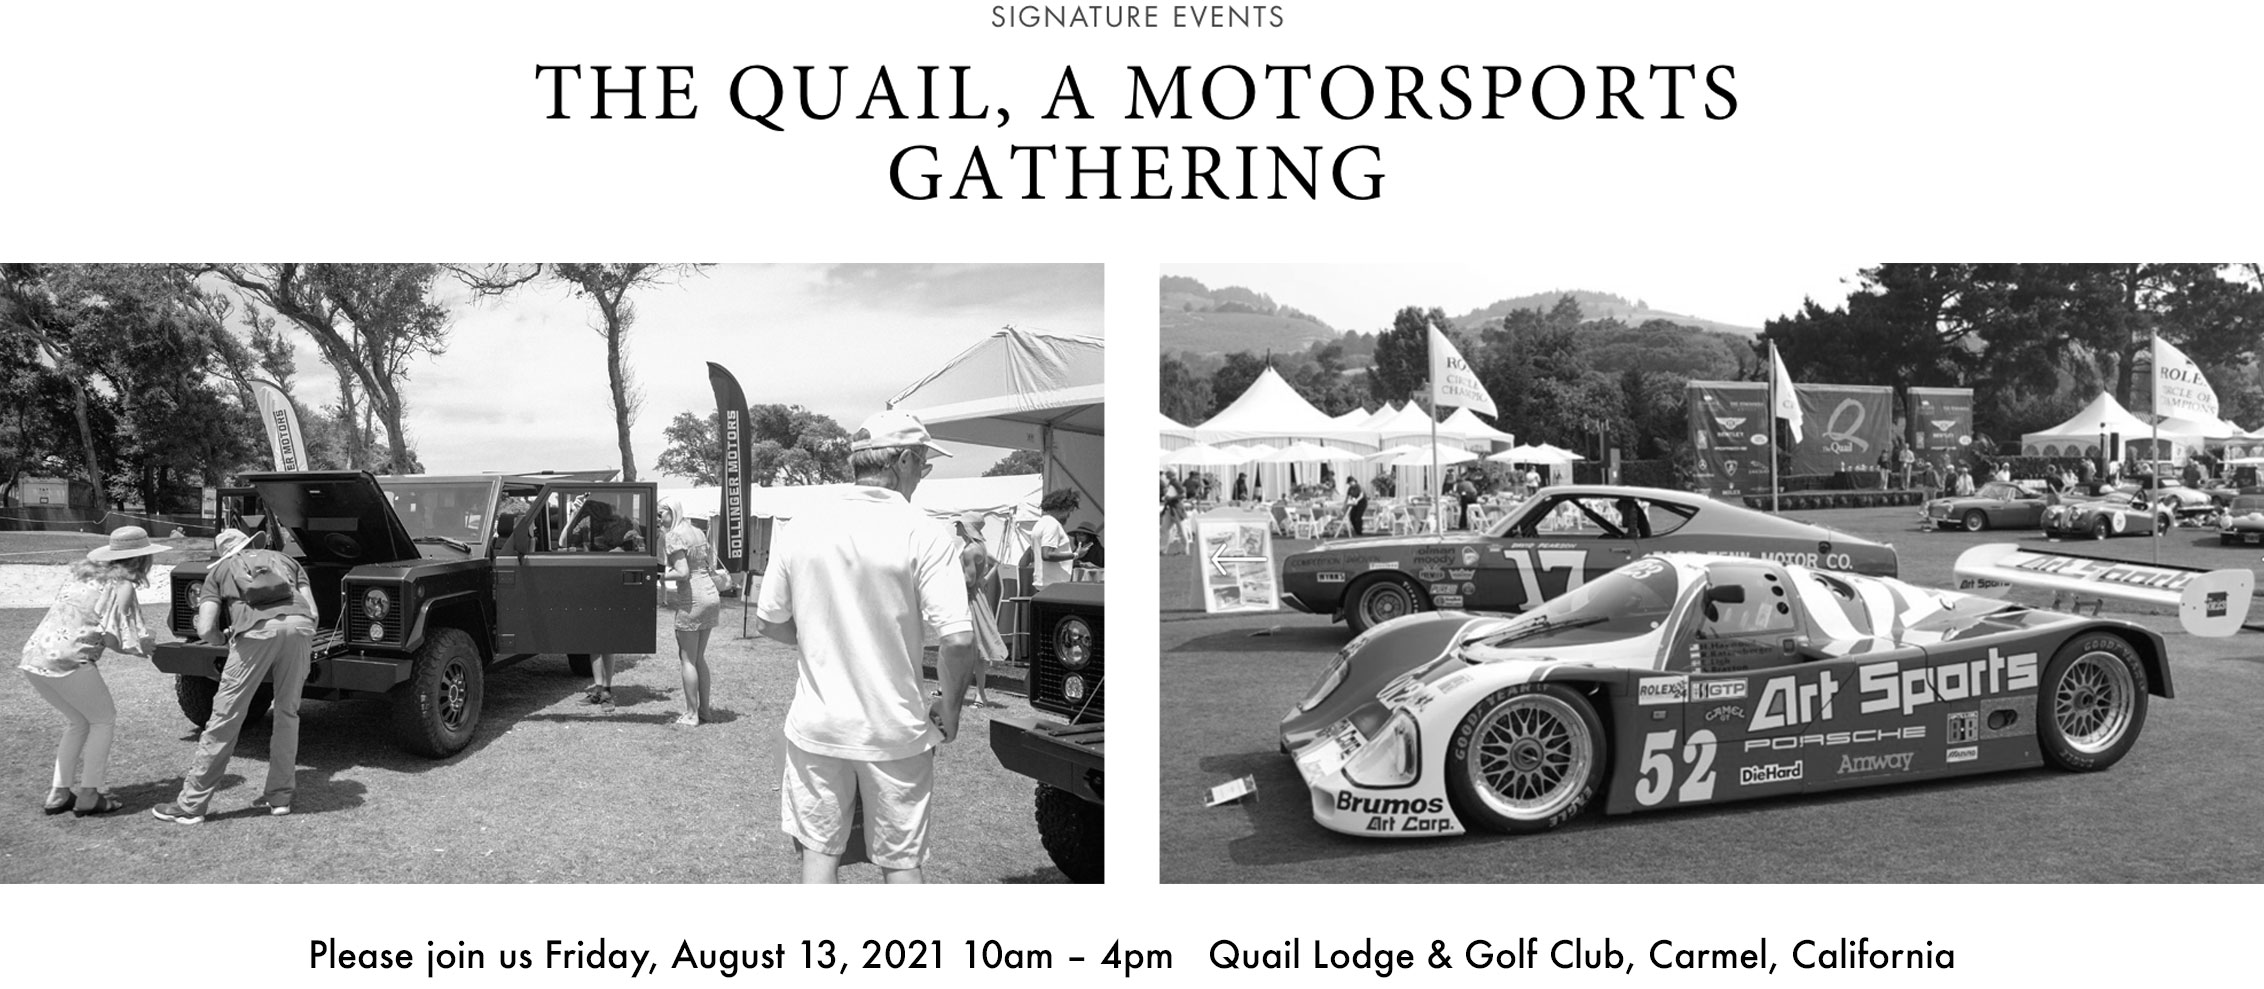 Announcement image for The Quail event in Carmel California, August 13, 2021